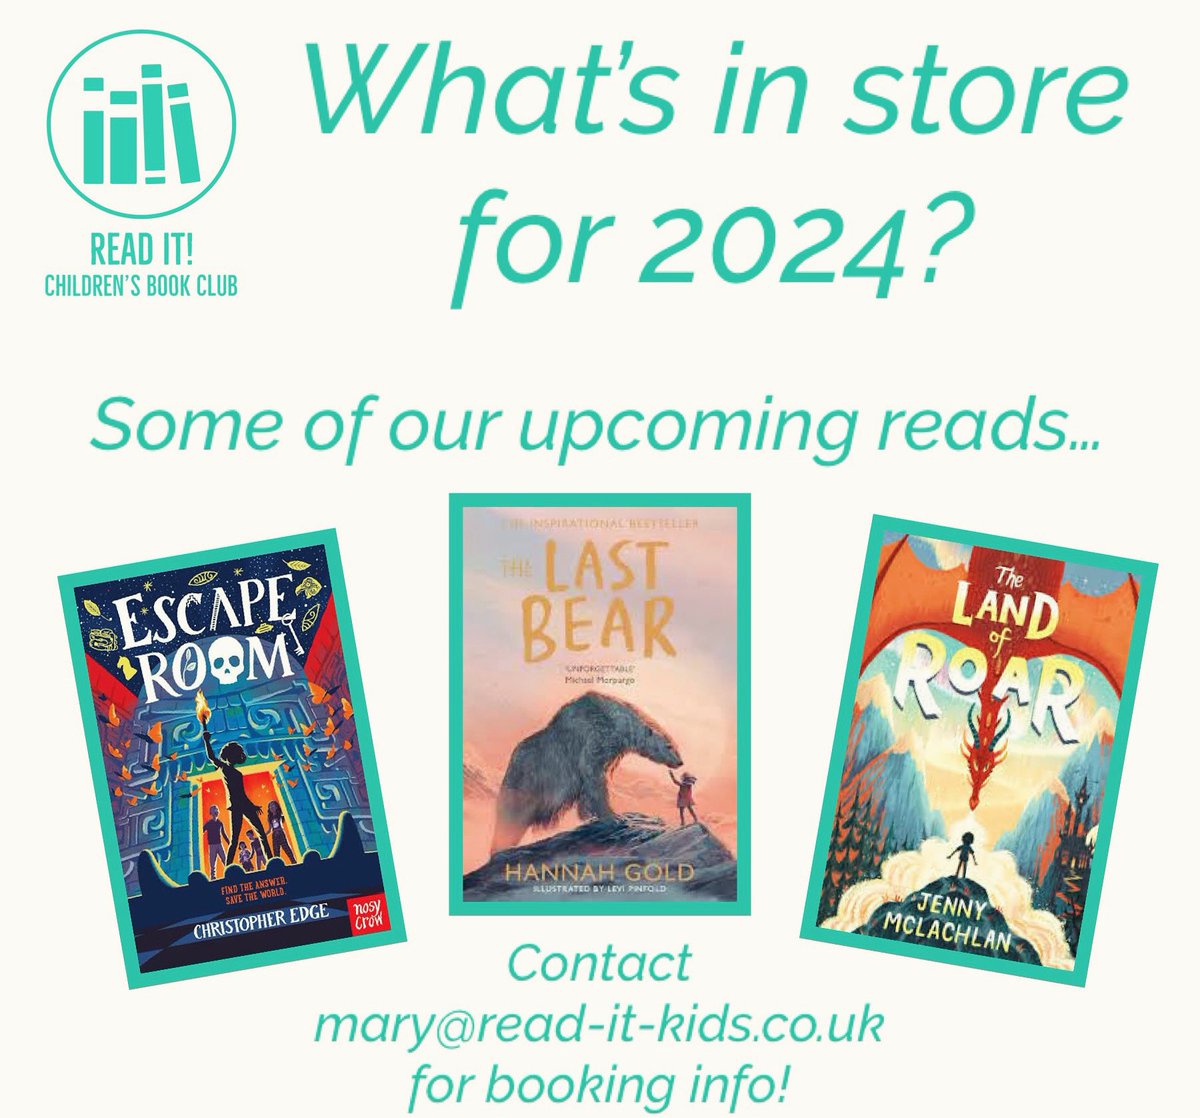 Some brilliant books in store for 2024 at Read It! Children’s Book Club. Tuesdays 3:30-4:30 at Chapter 34 Book Shop, Shoreham-by-Sea. For more information or to book, contact mary@read-it-kids.co.uk @read_it_kids @edgechristopher @HGold_author @JennyMcLachlan1